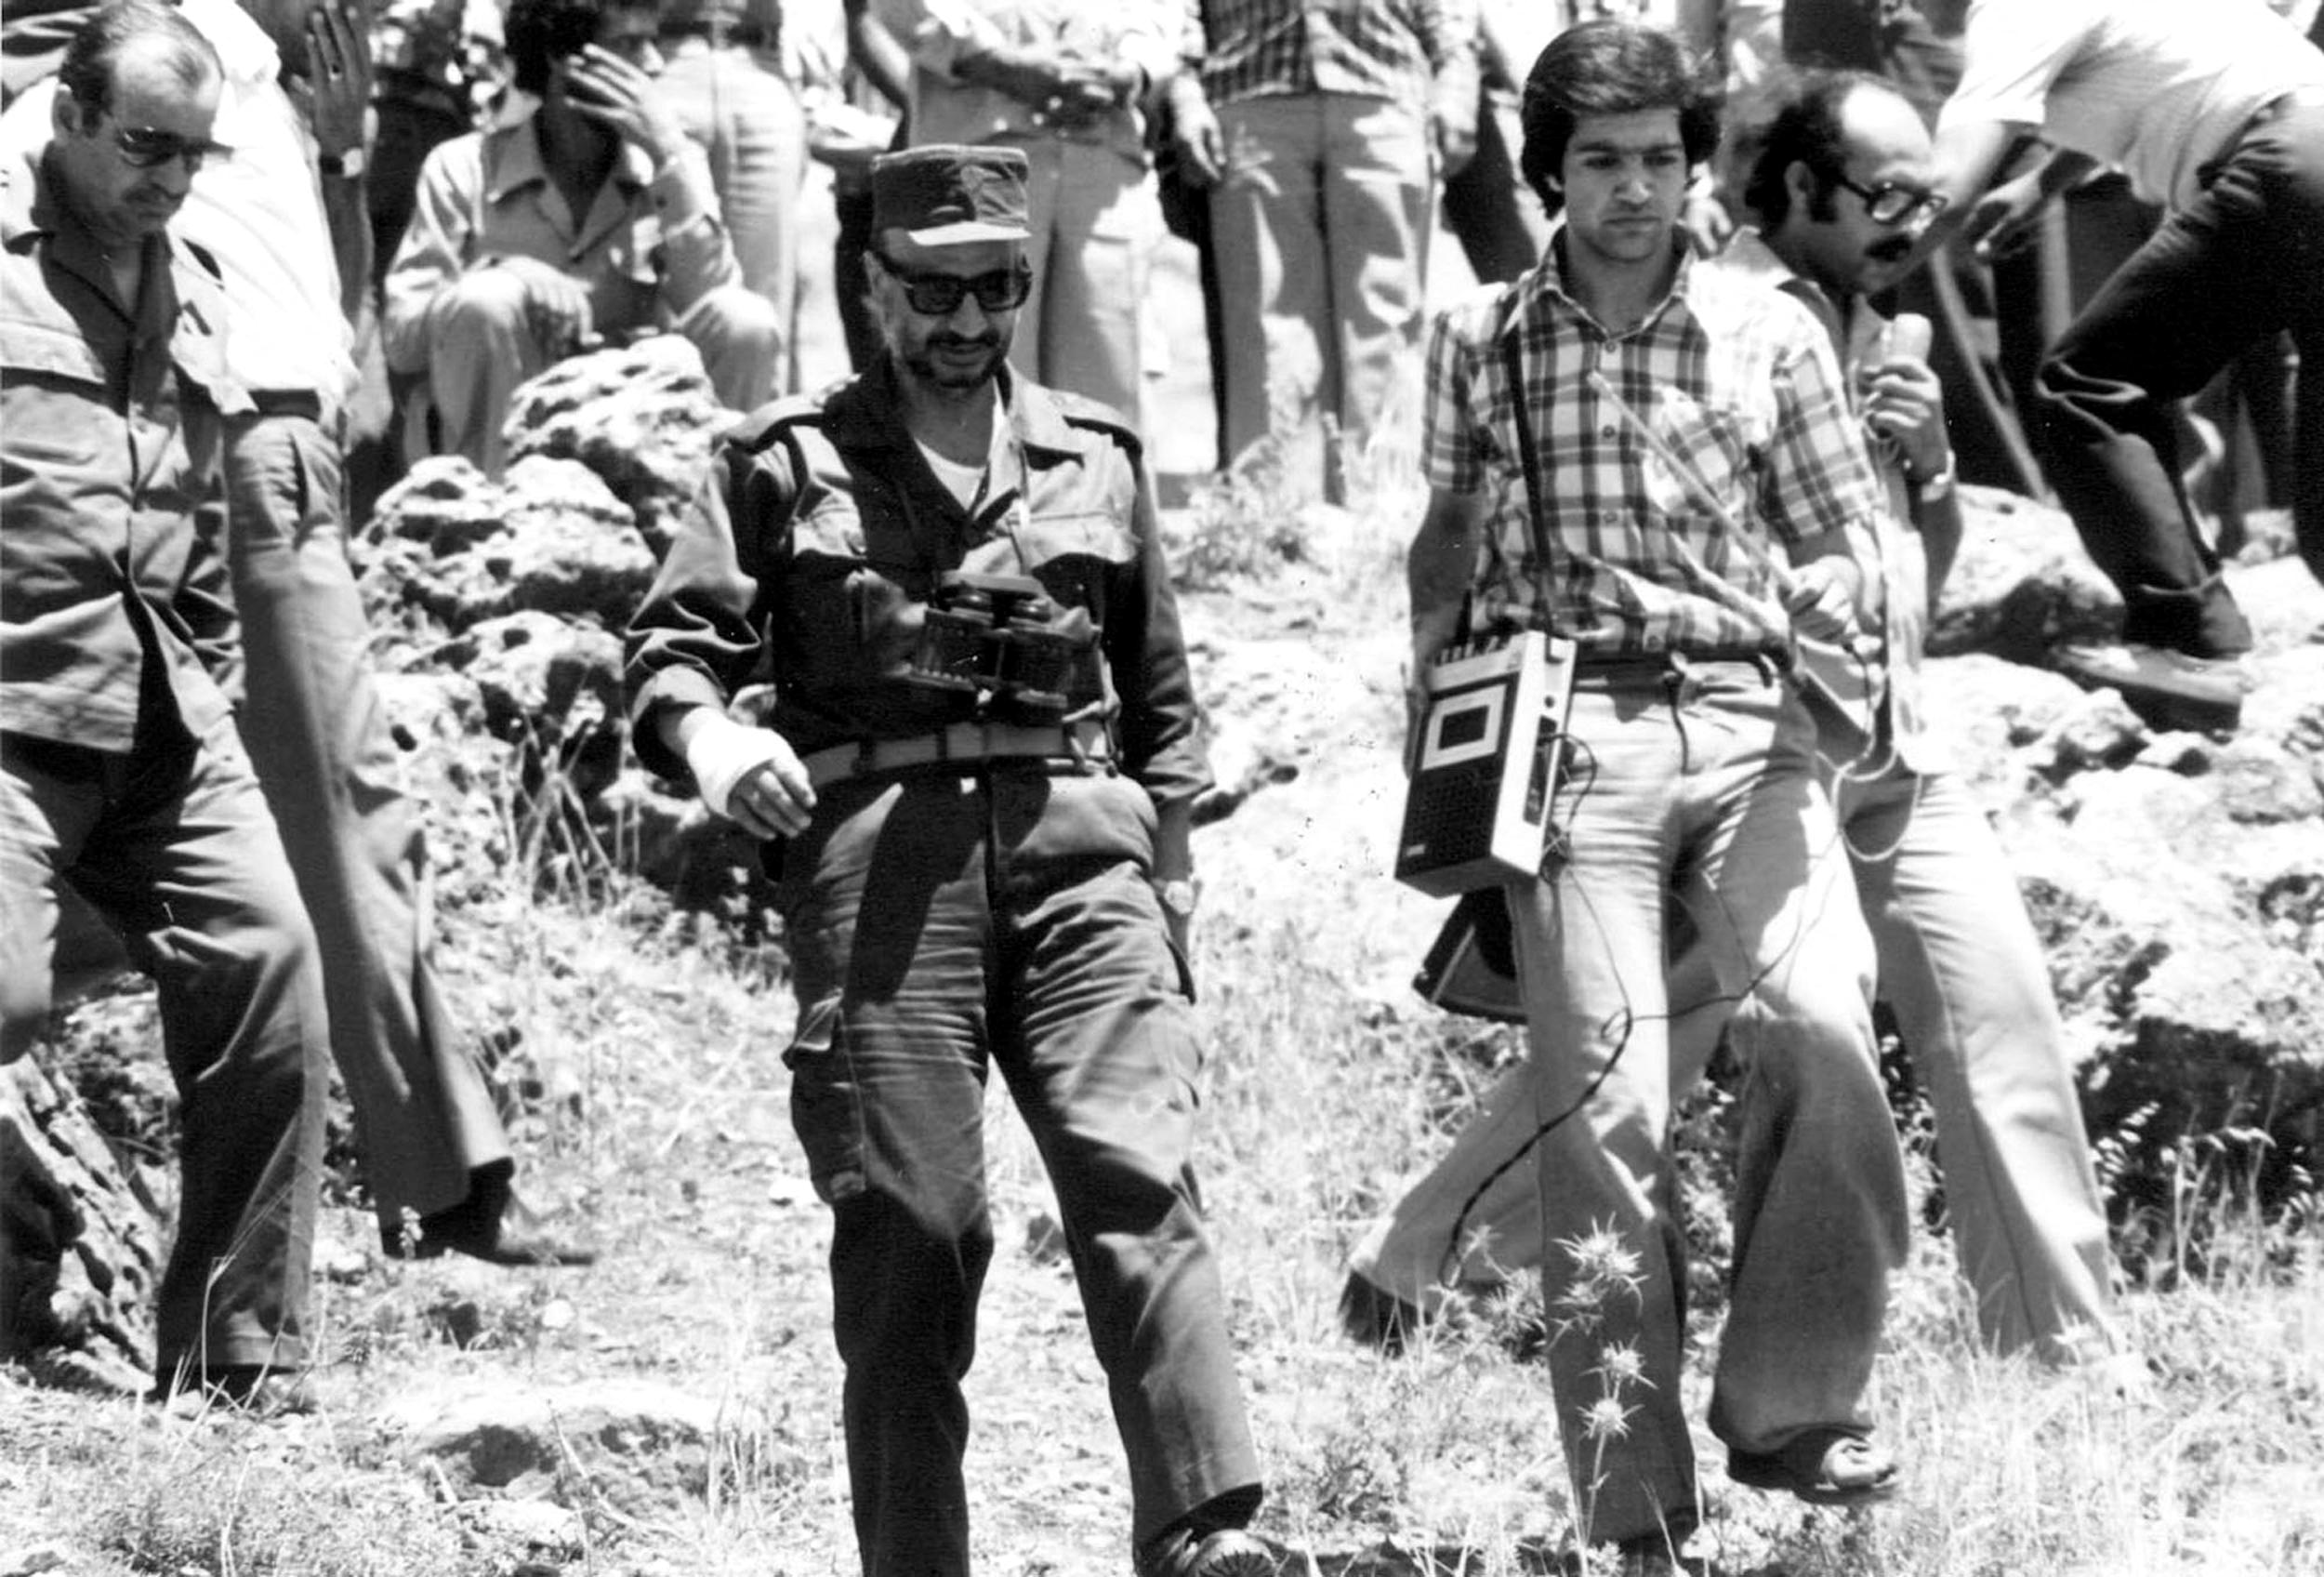 Undated handout picture from the Palestinian Authority's archives shows Palestinian leader Yasser Arafat in 1978 in south Lebanon (AFP)